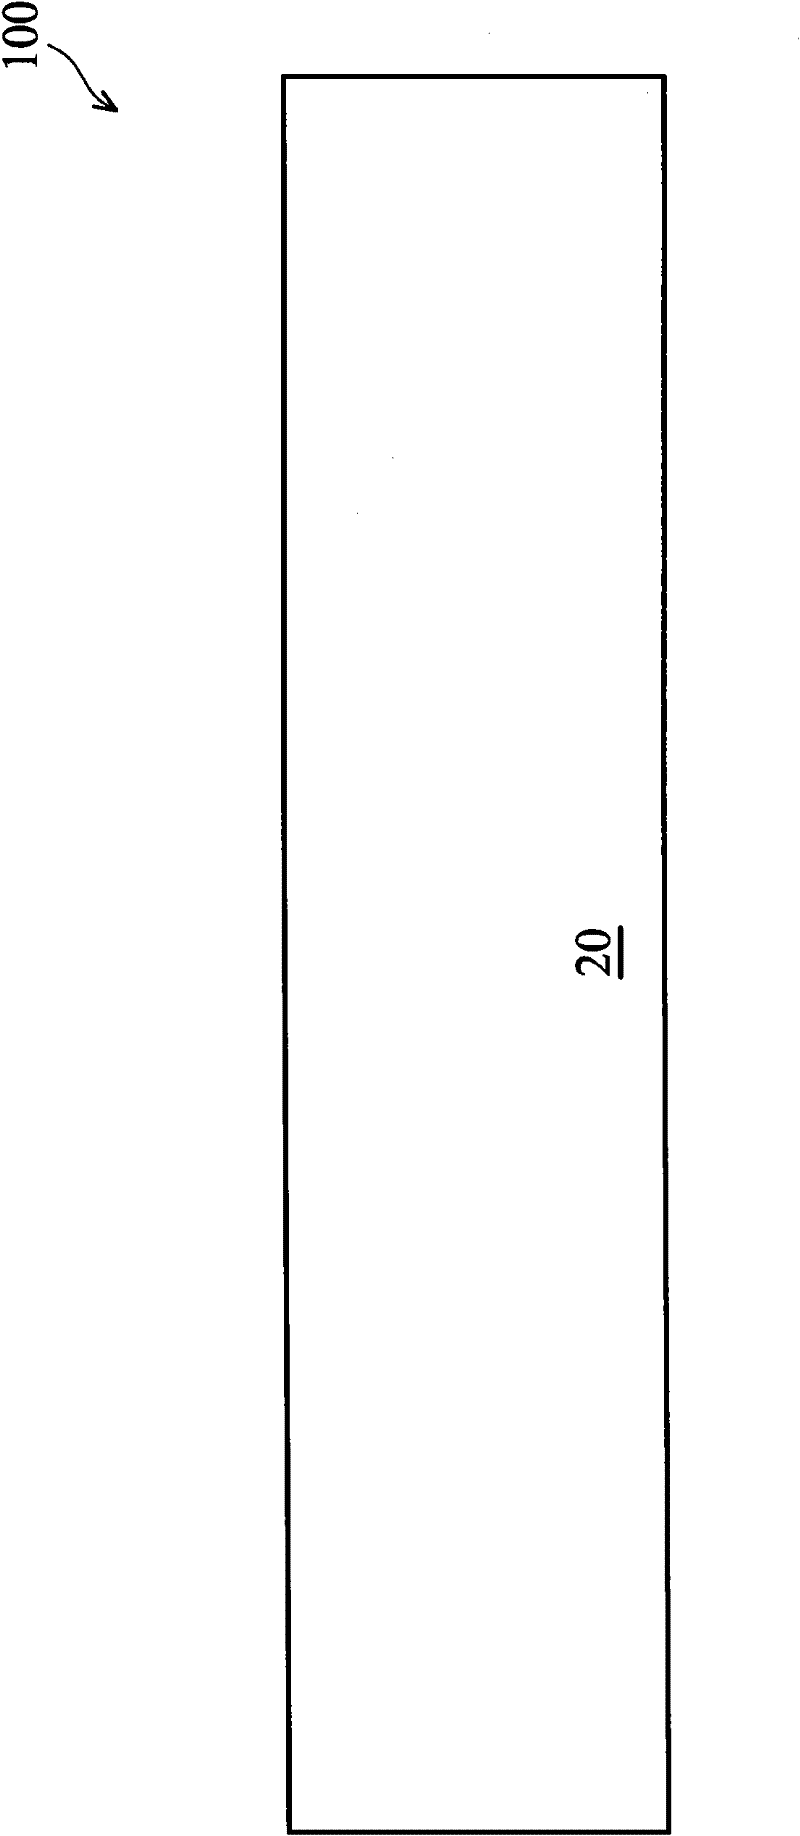 Light-emitting devices and its forming method